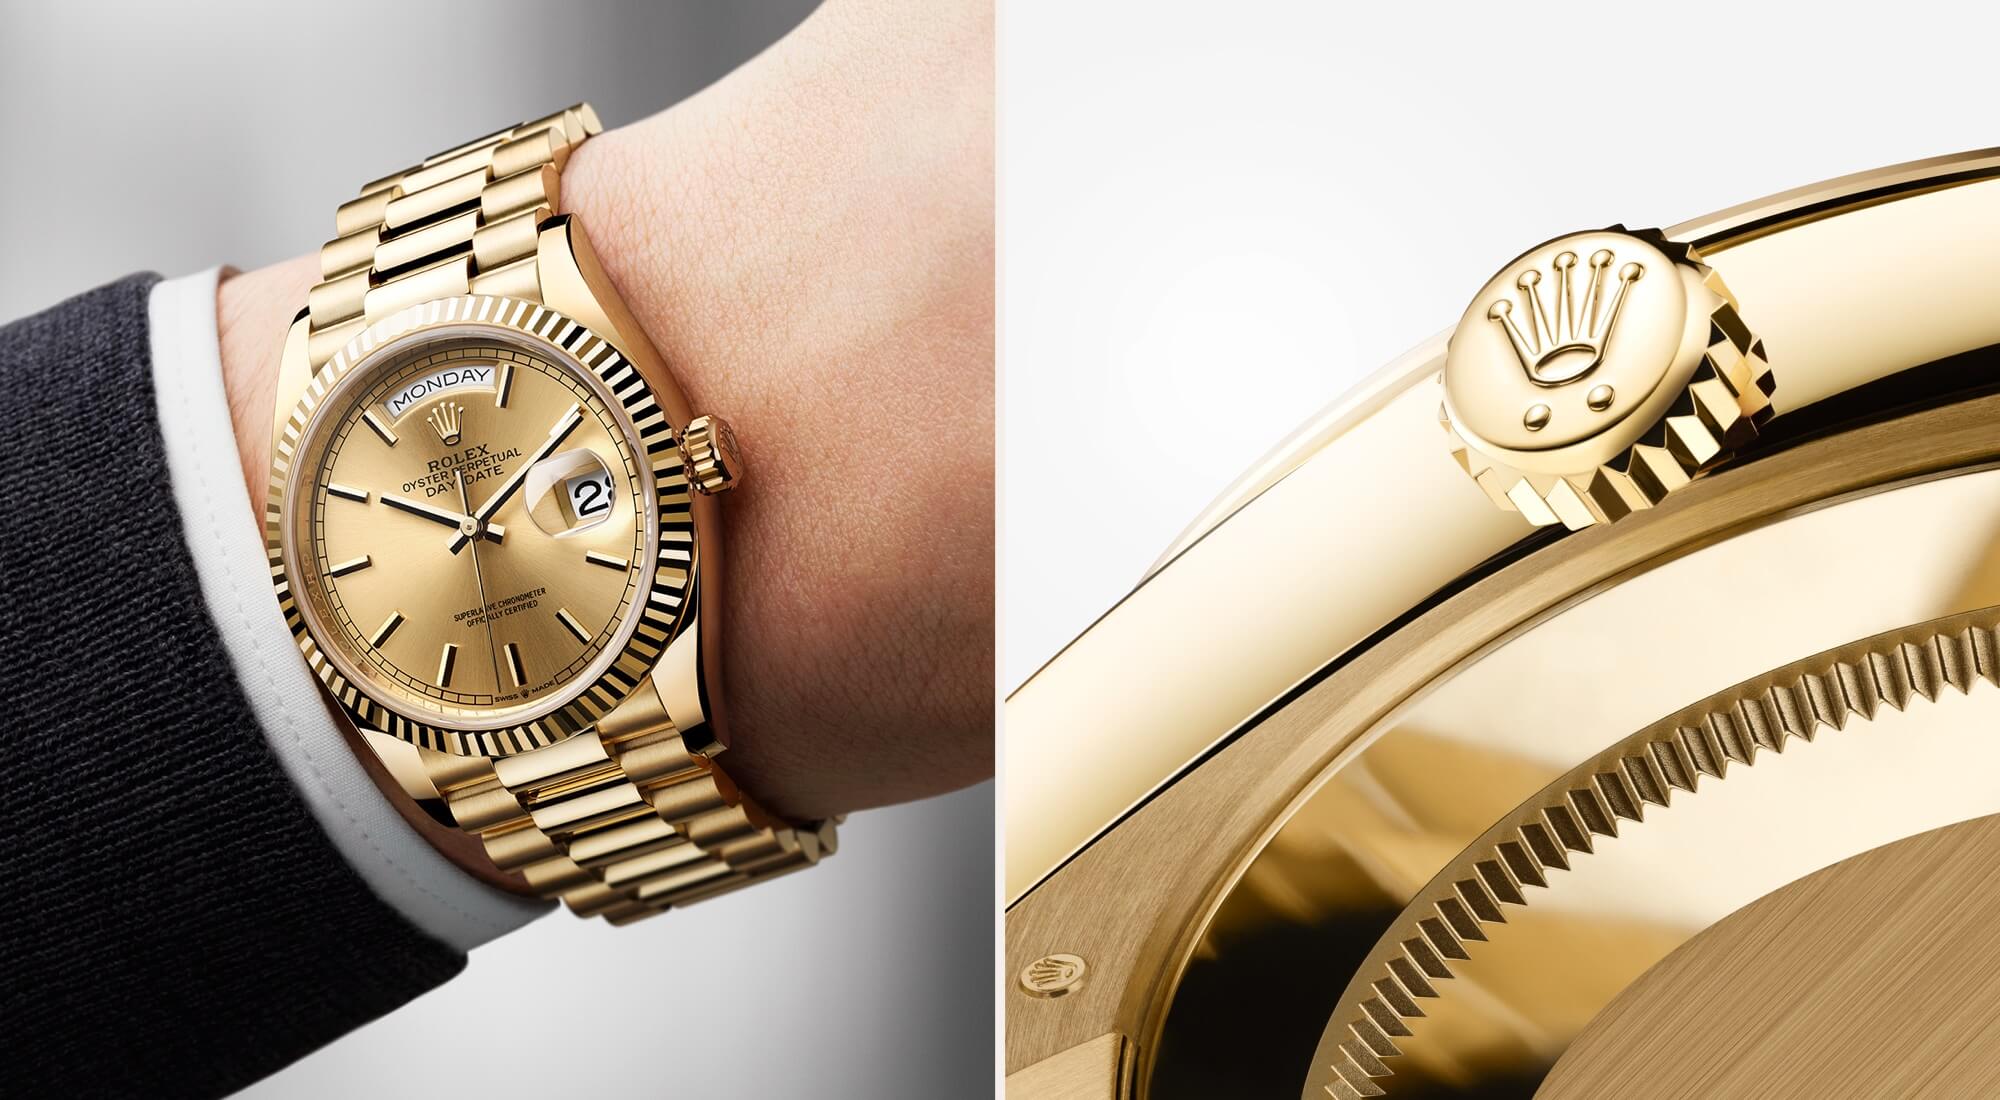 rolex day date watches - global watch company